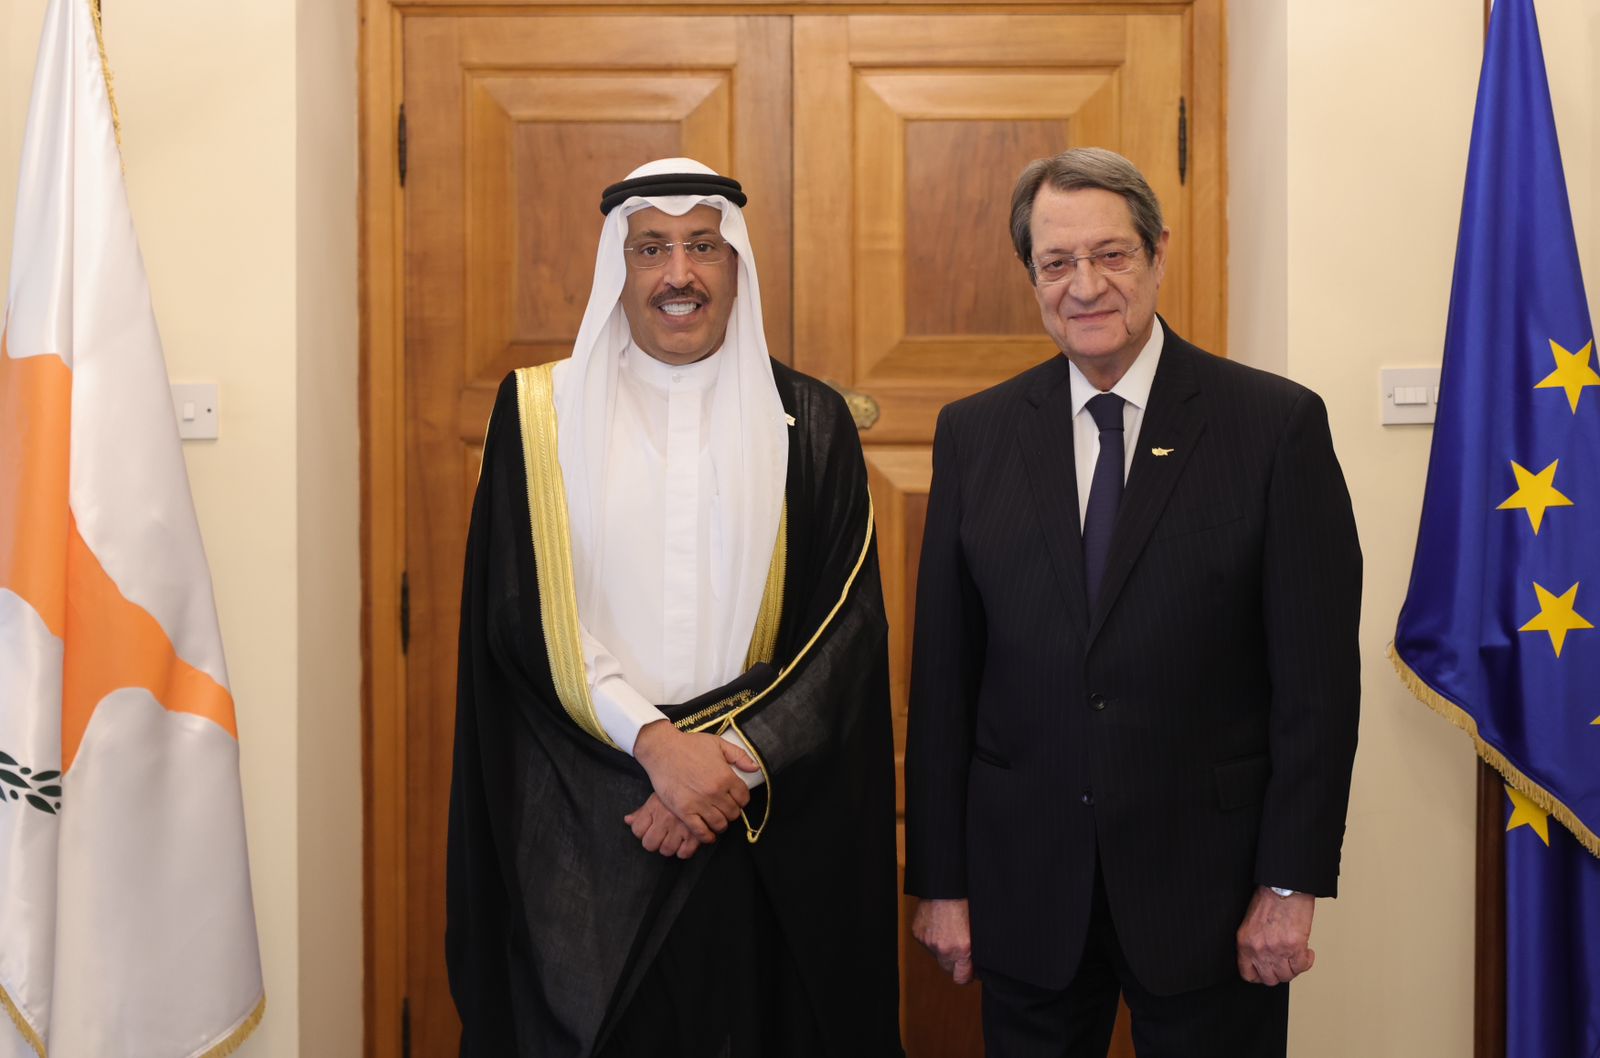 Kuwait Amb. presents his credentials to Cypriot Pres.